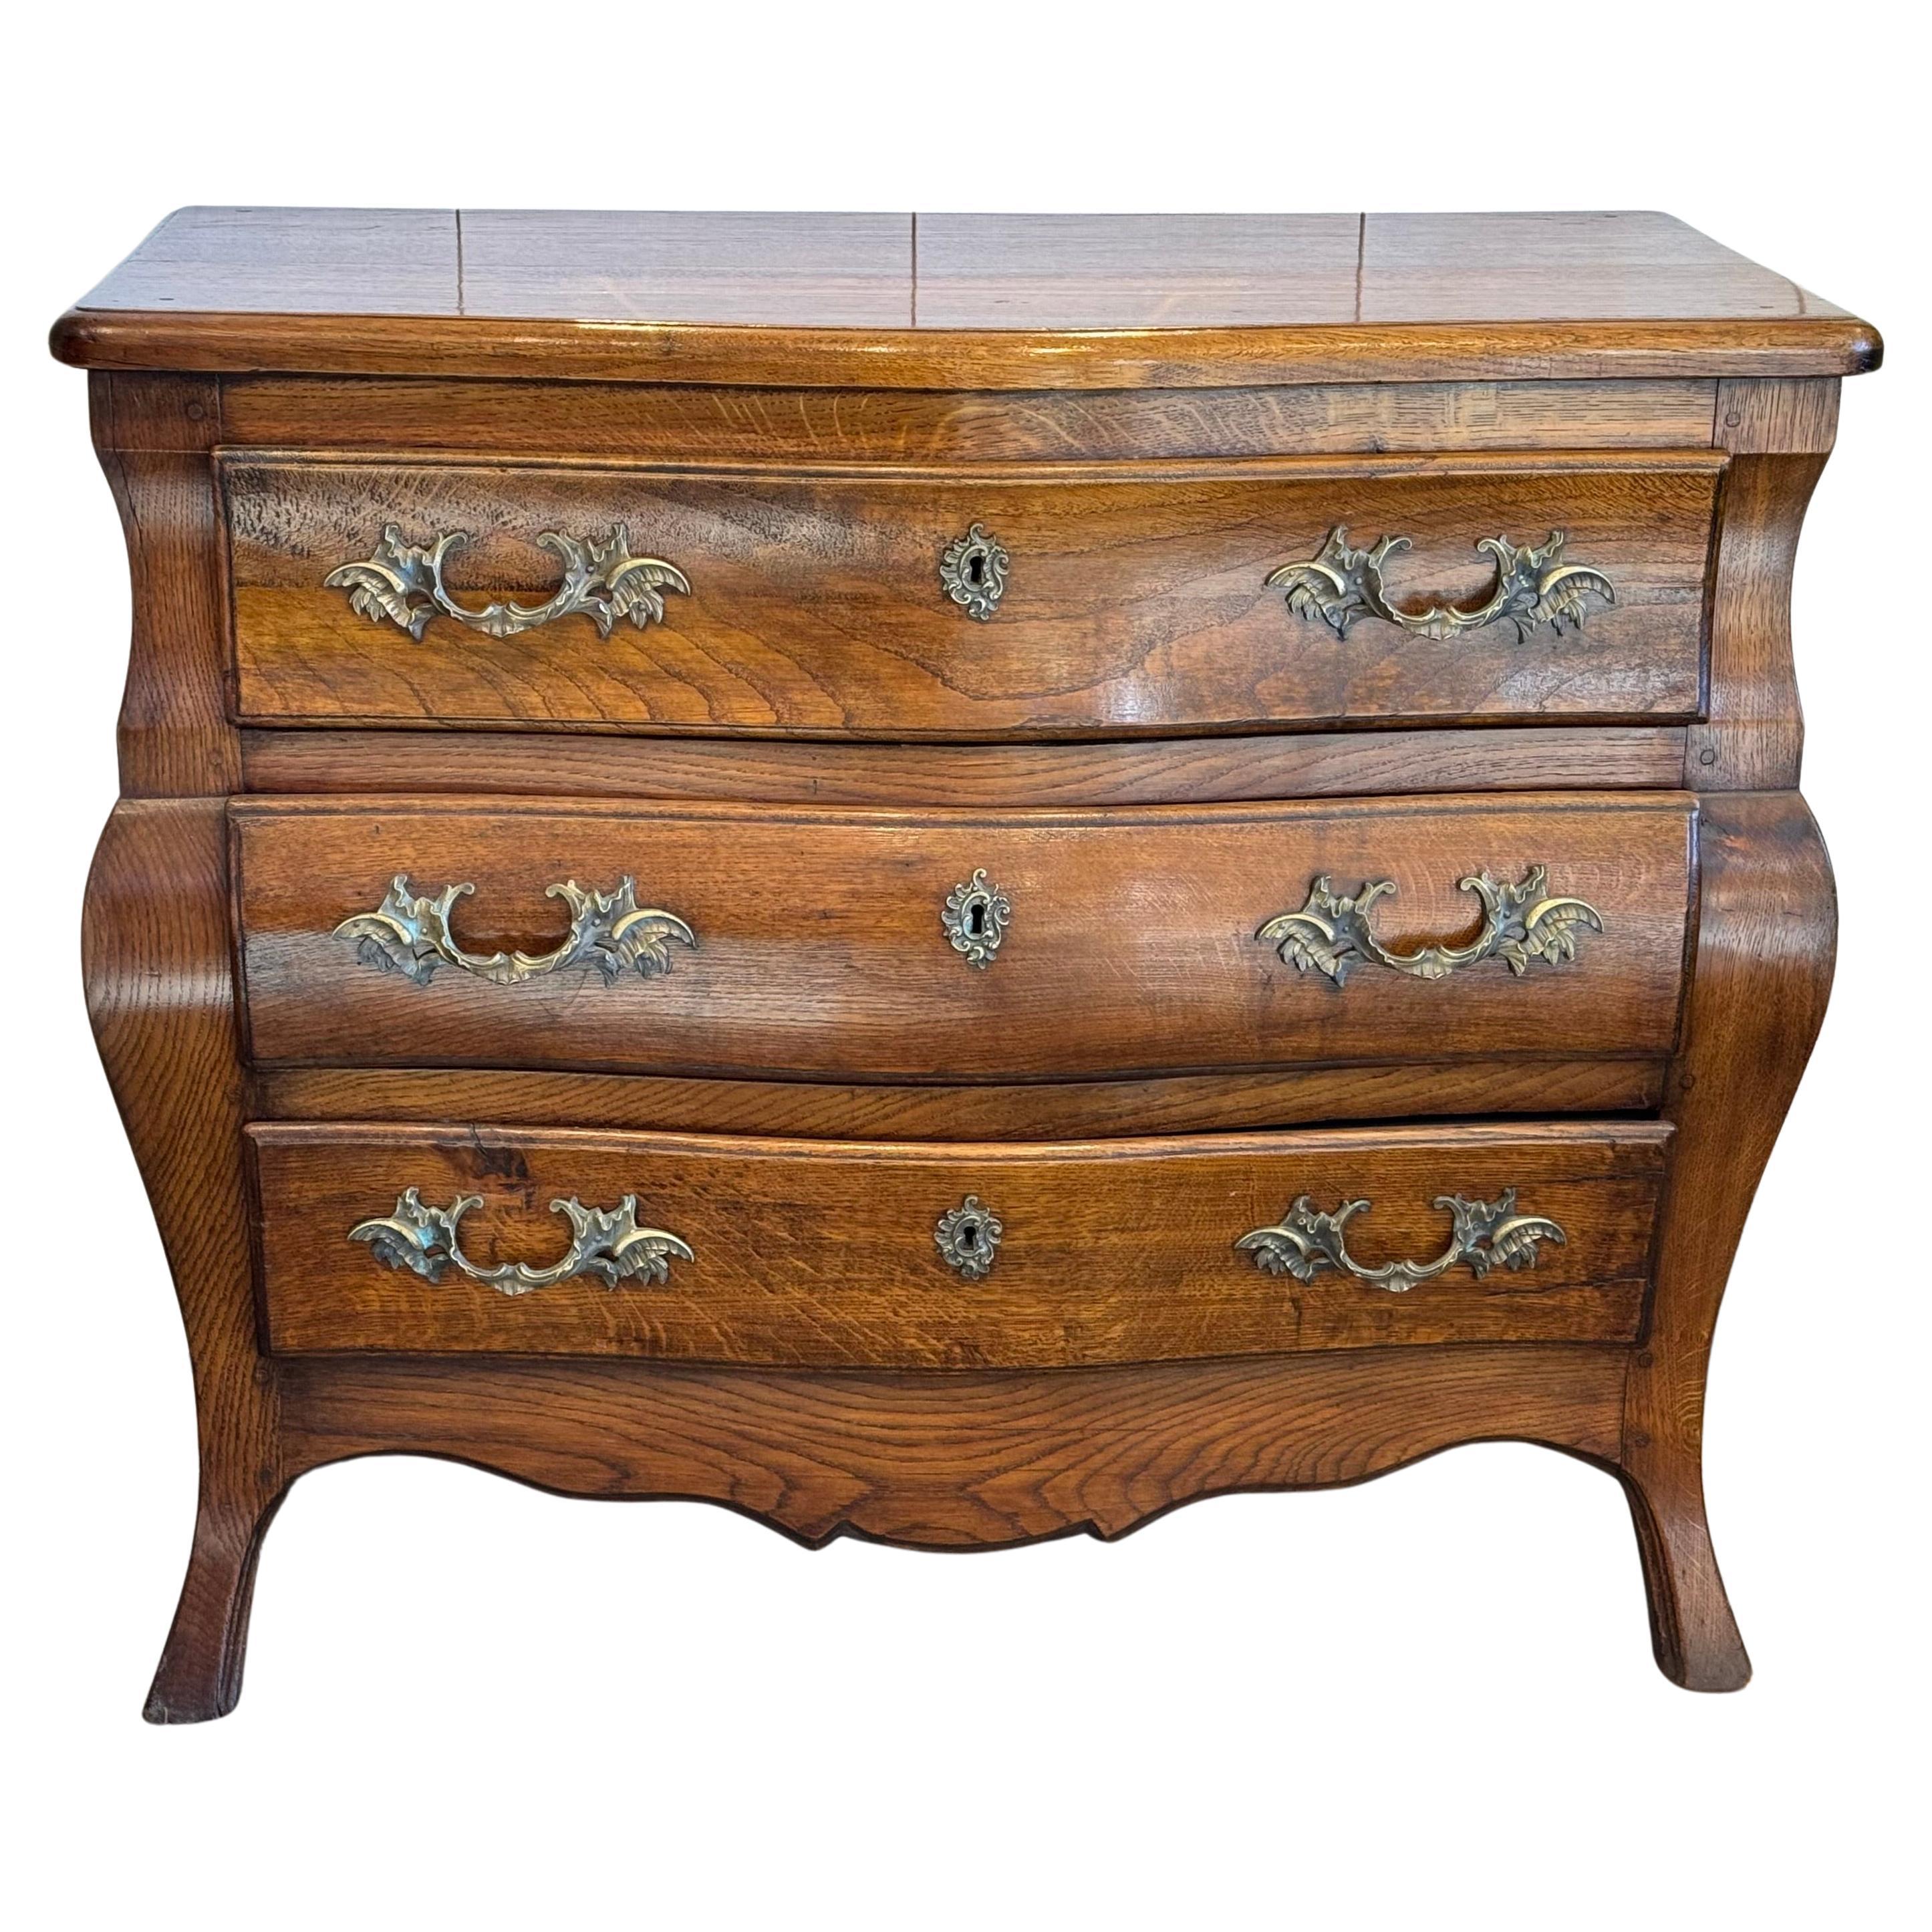 Late 19th Century Serpentine Front Chest For Sale